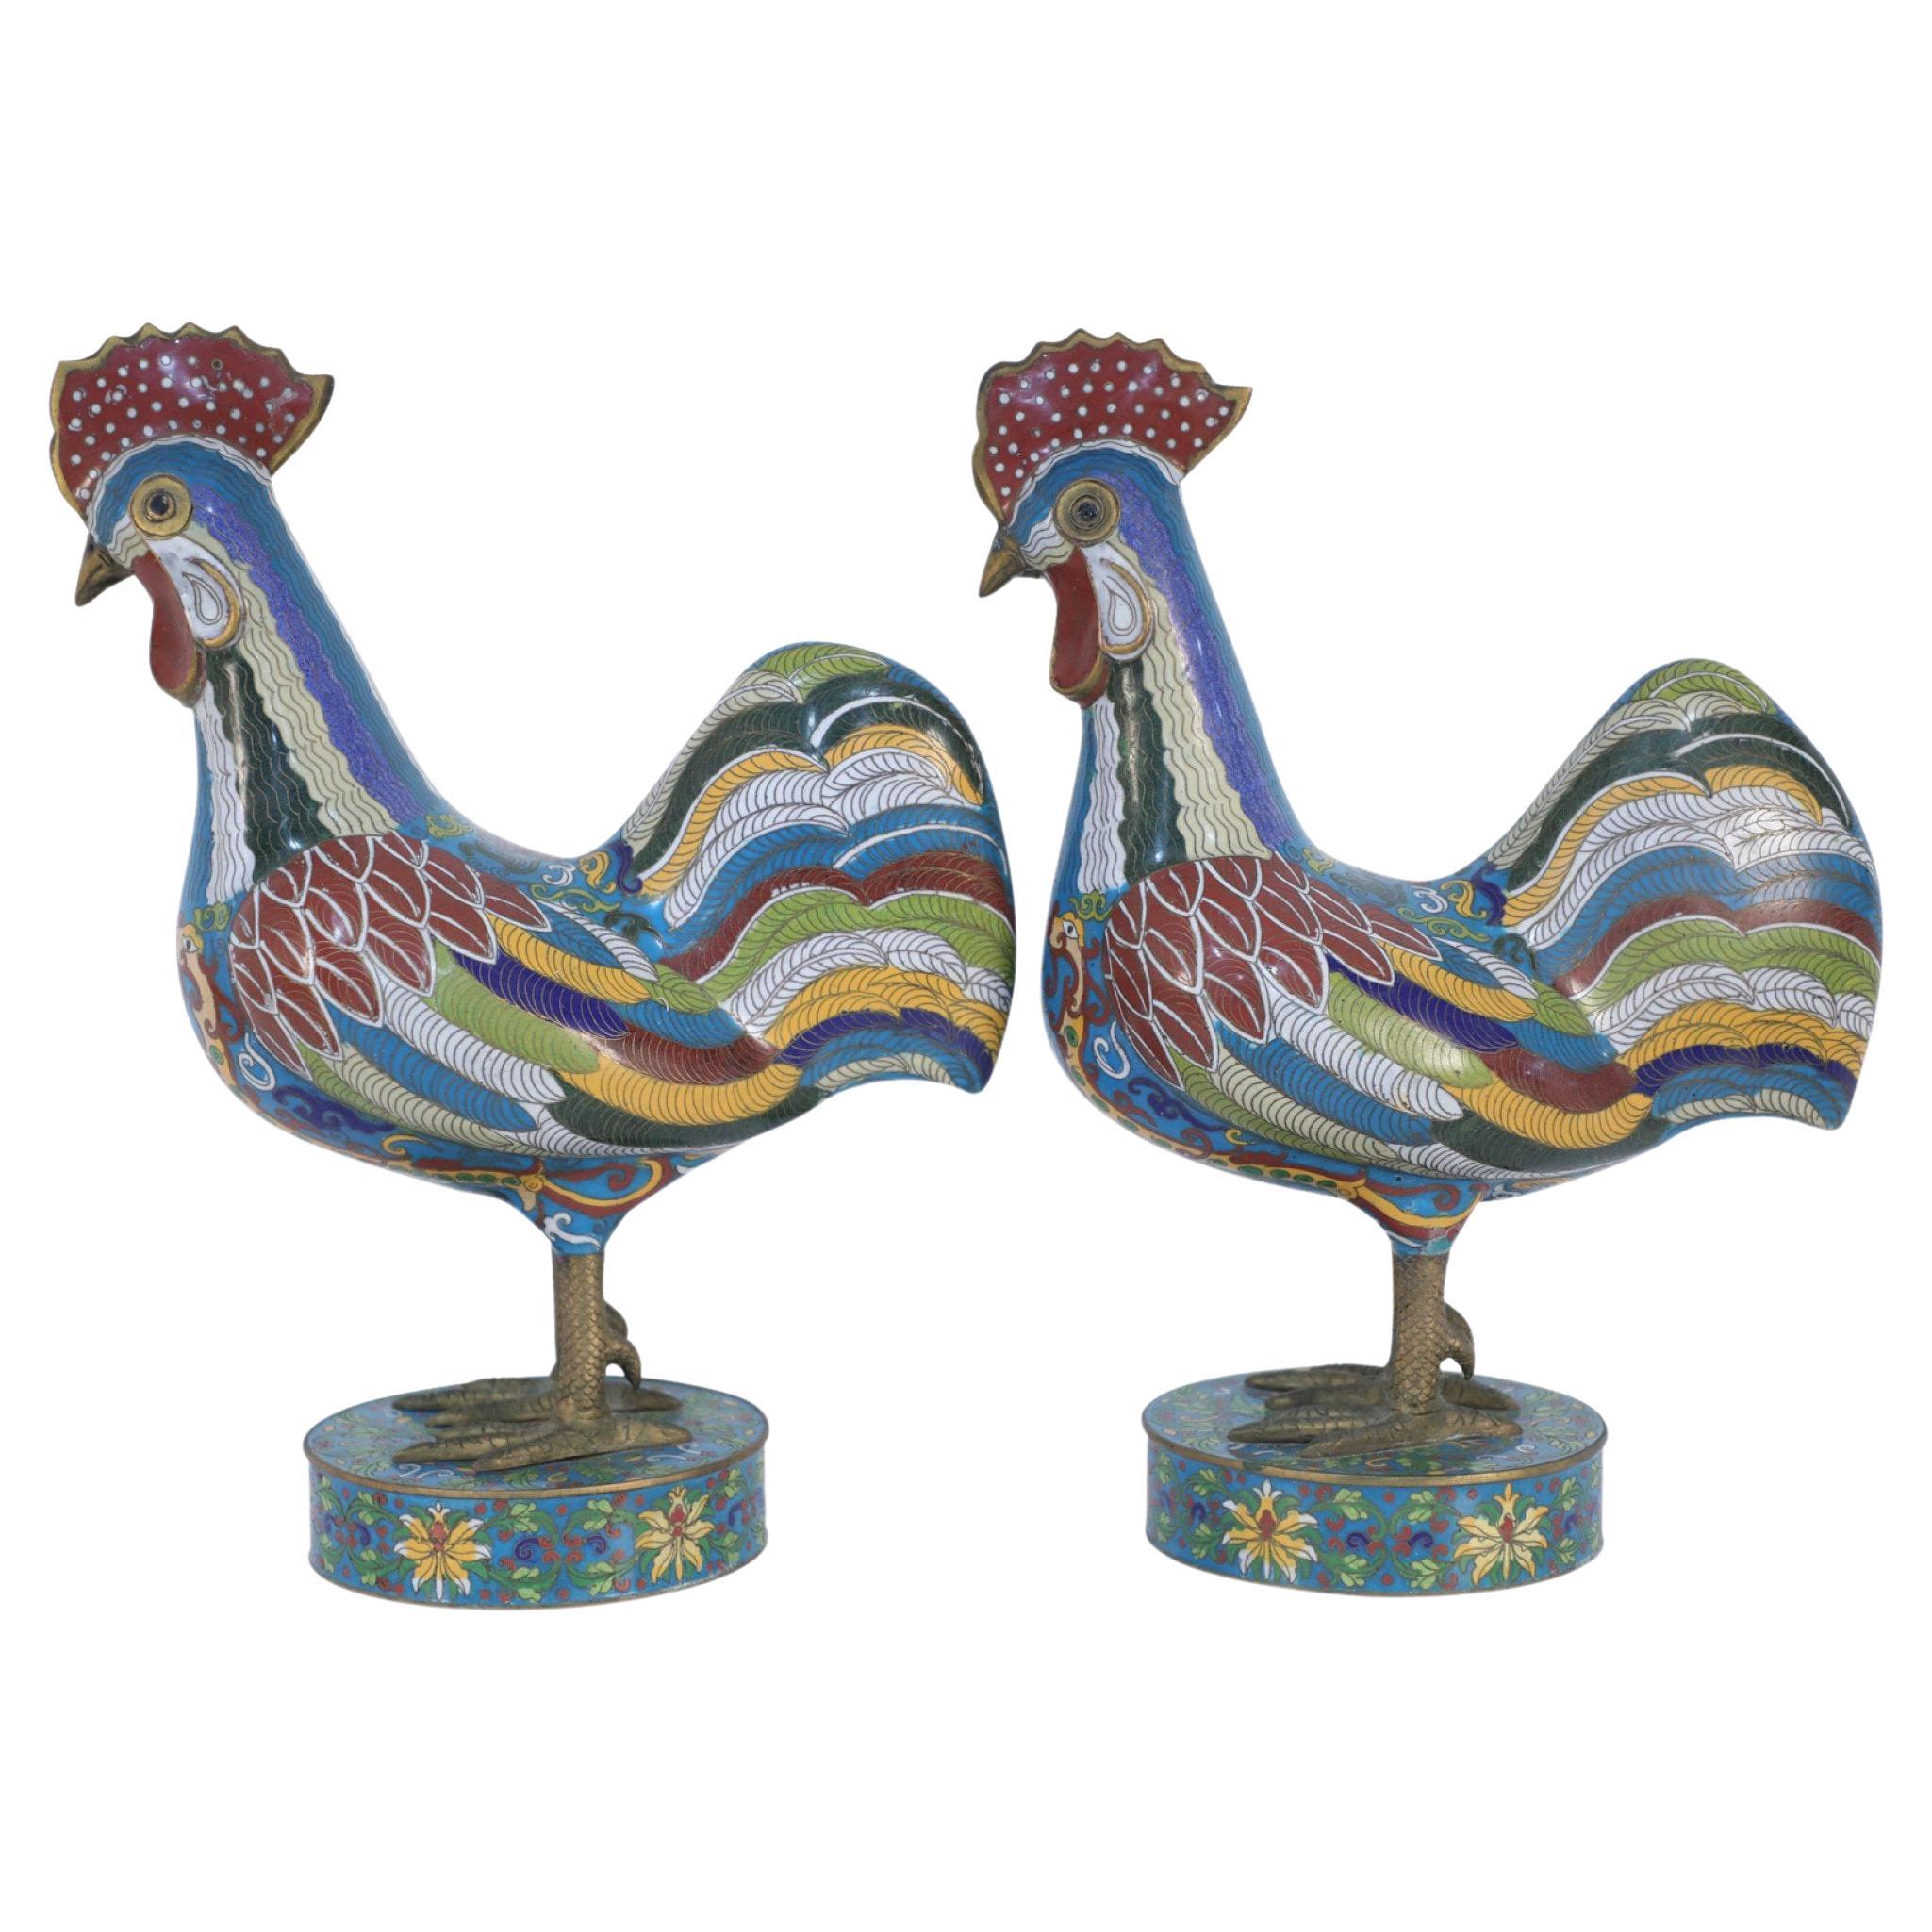 Pair of Antique Chinese Multi-Colored Cloisonne Rooster Sculptures